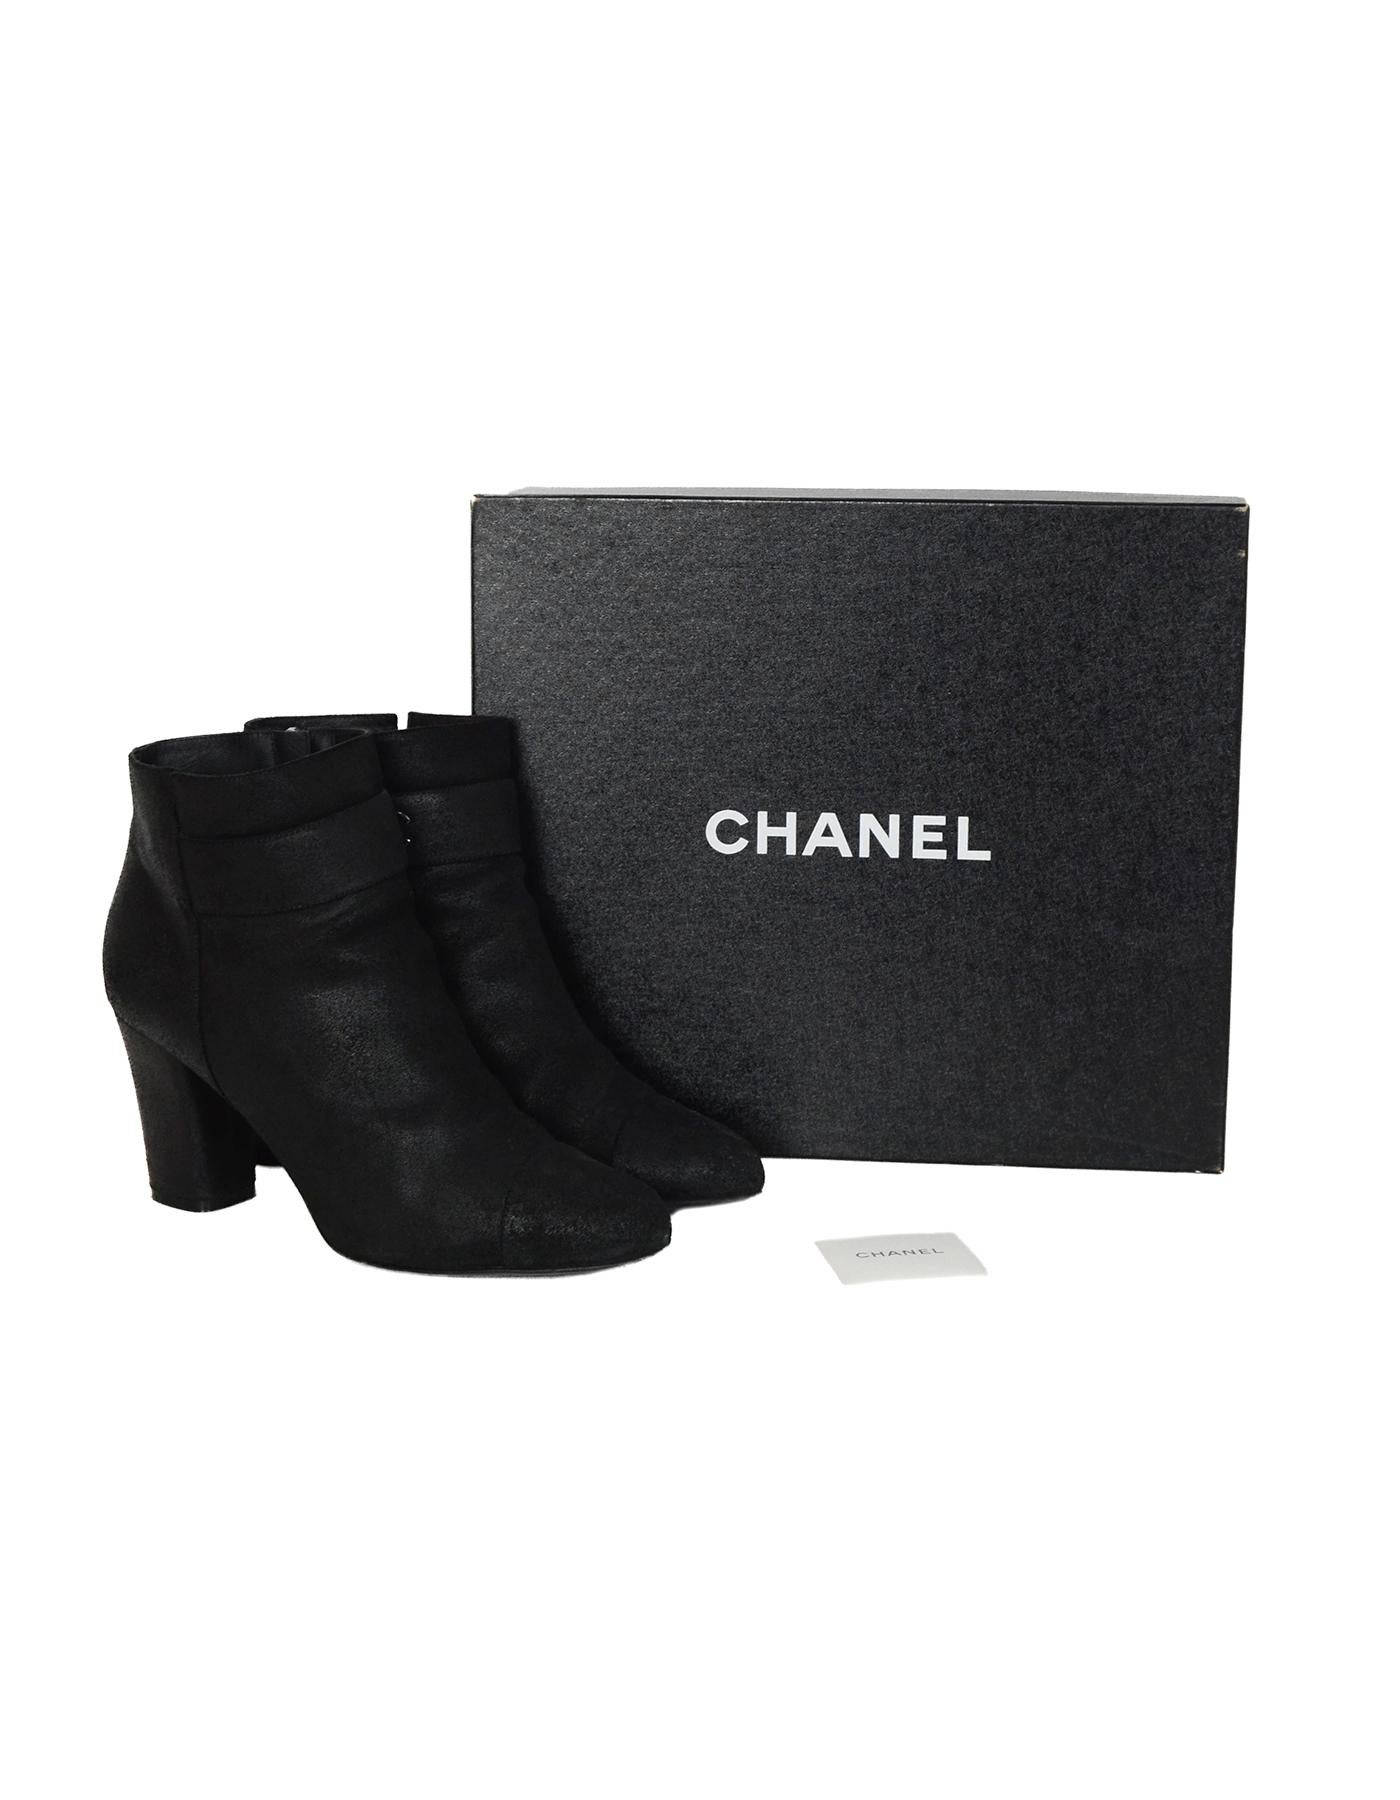 Chanel 2012 Black Suede Heeled Booties W/ CC Sz 42

Made In: Italy
Year of Production: 2012
Color: Black
Hardware: Silvertone, black
Materials: Sueded leather 
Closure/Opening: Side zipper
Overall Condition: Excellent pre-owned condition with